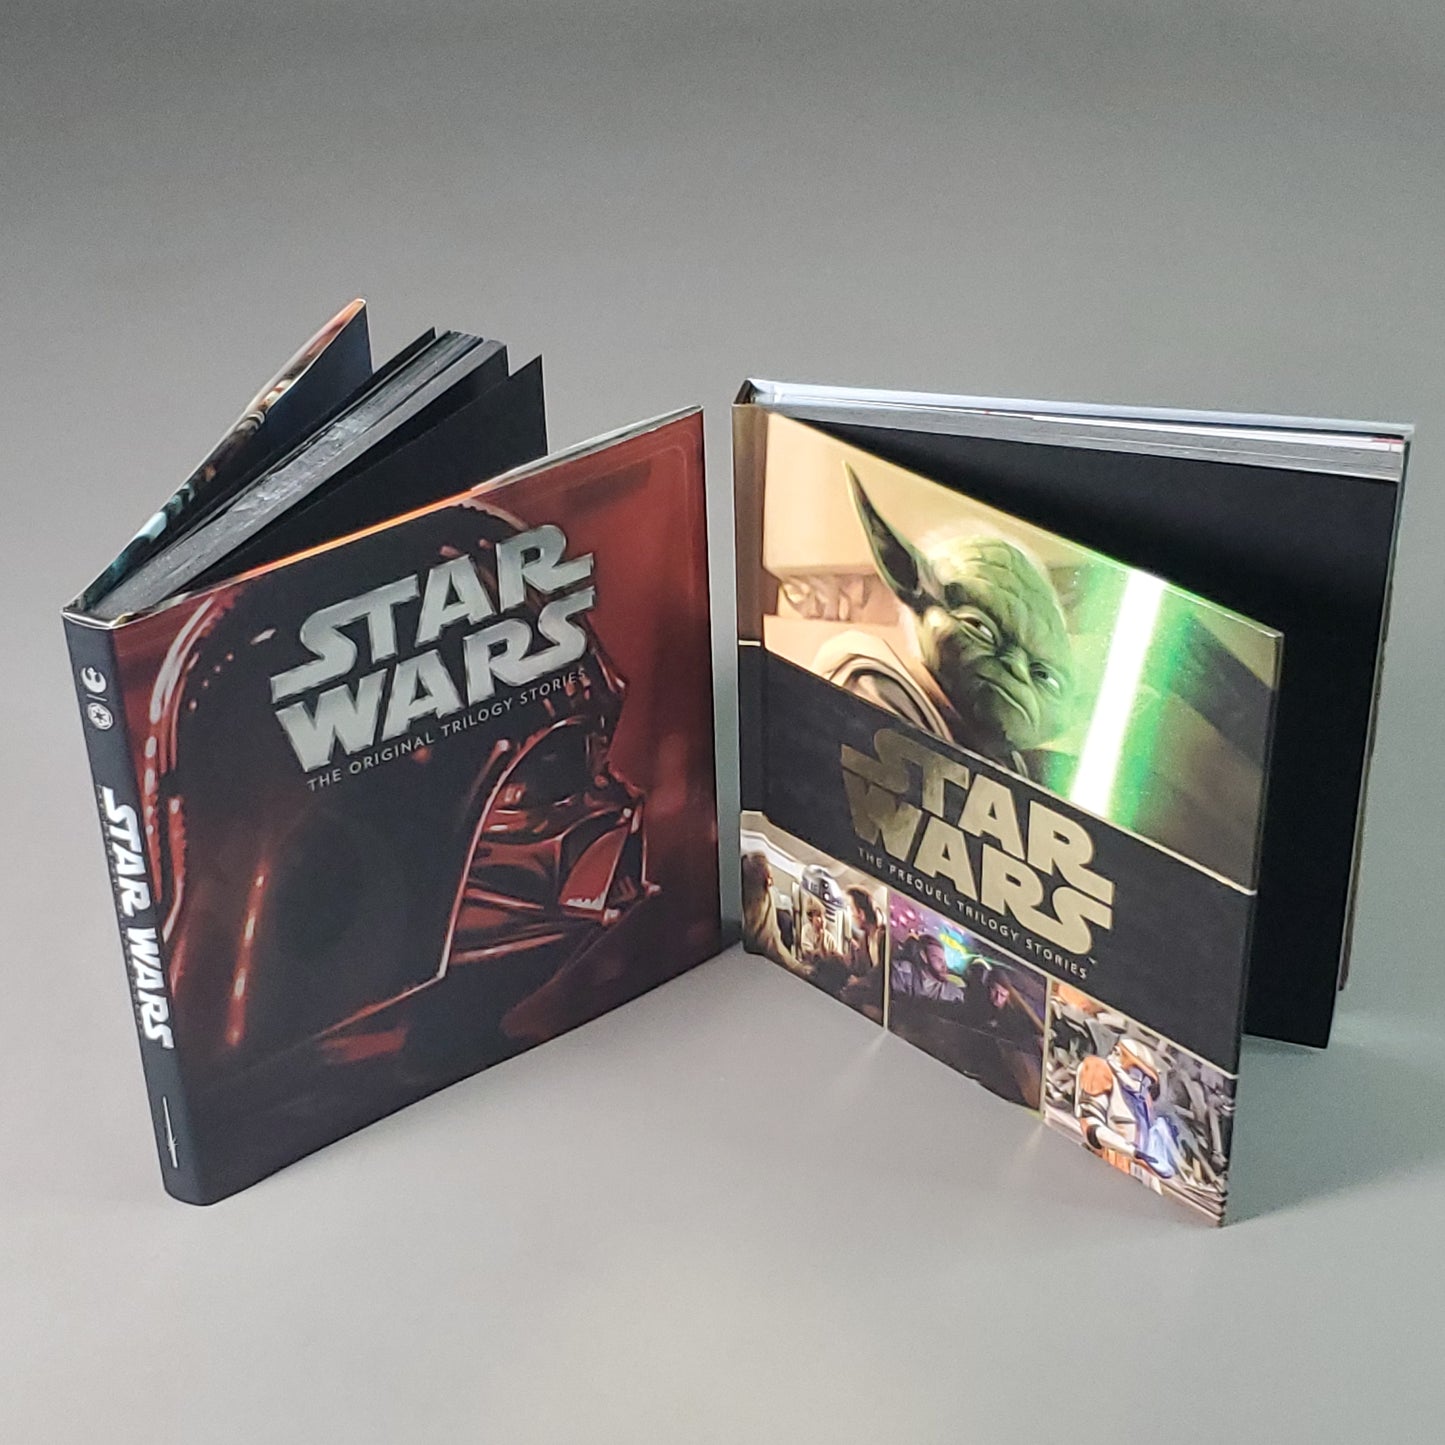 Star Wars 2 Pack Book Set Original & Prequel Trilogy Stories Illustrated By Brian Rood (New)